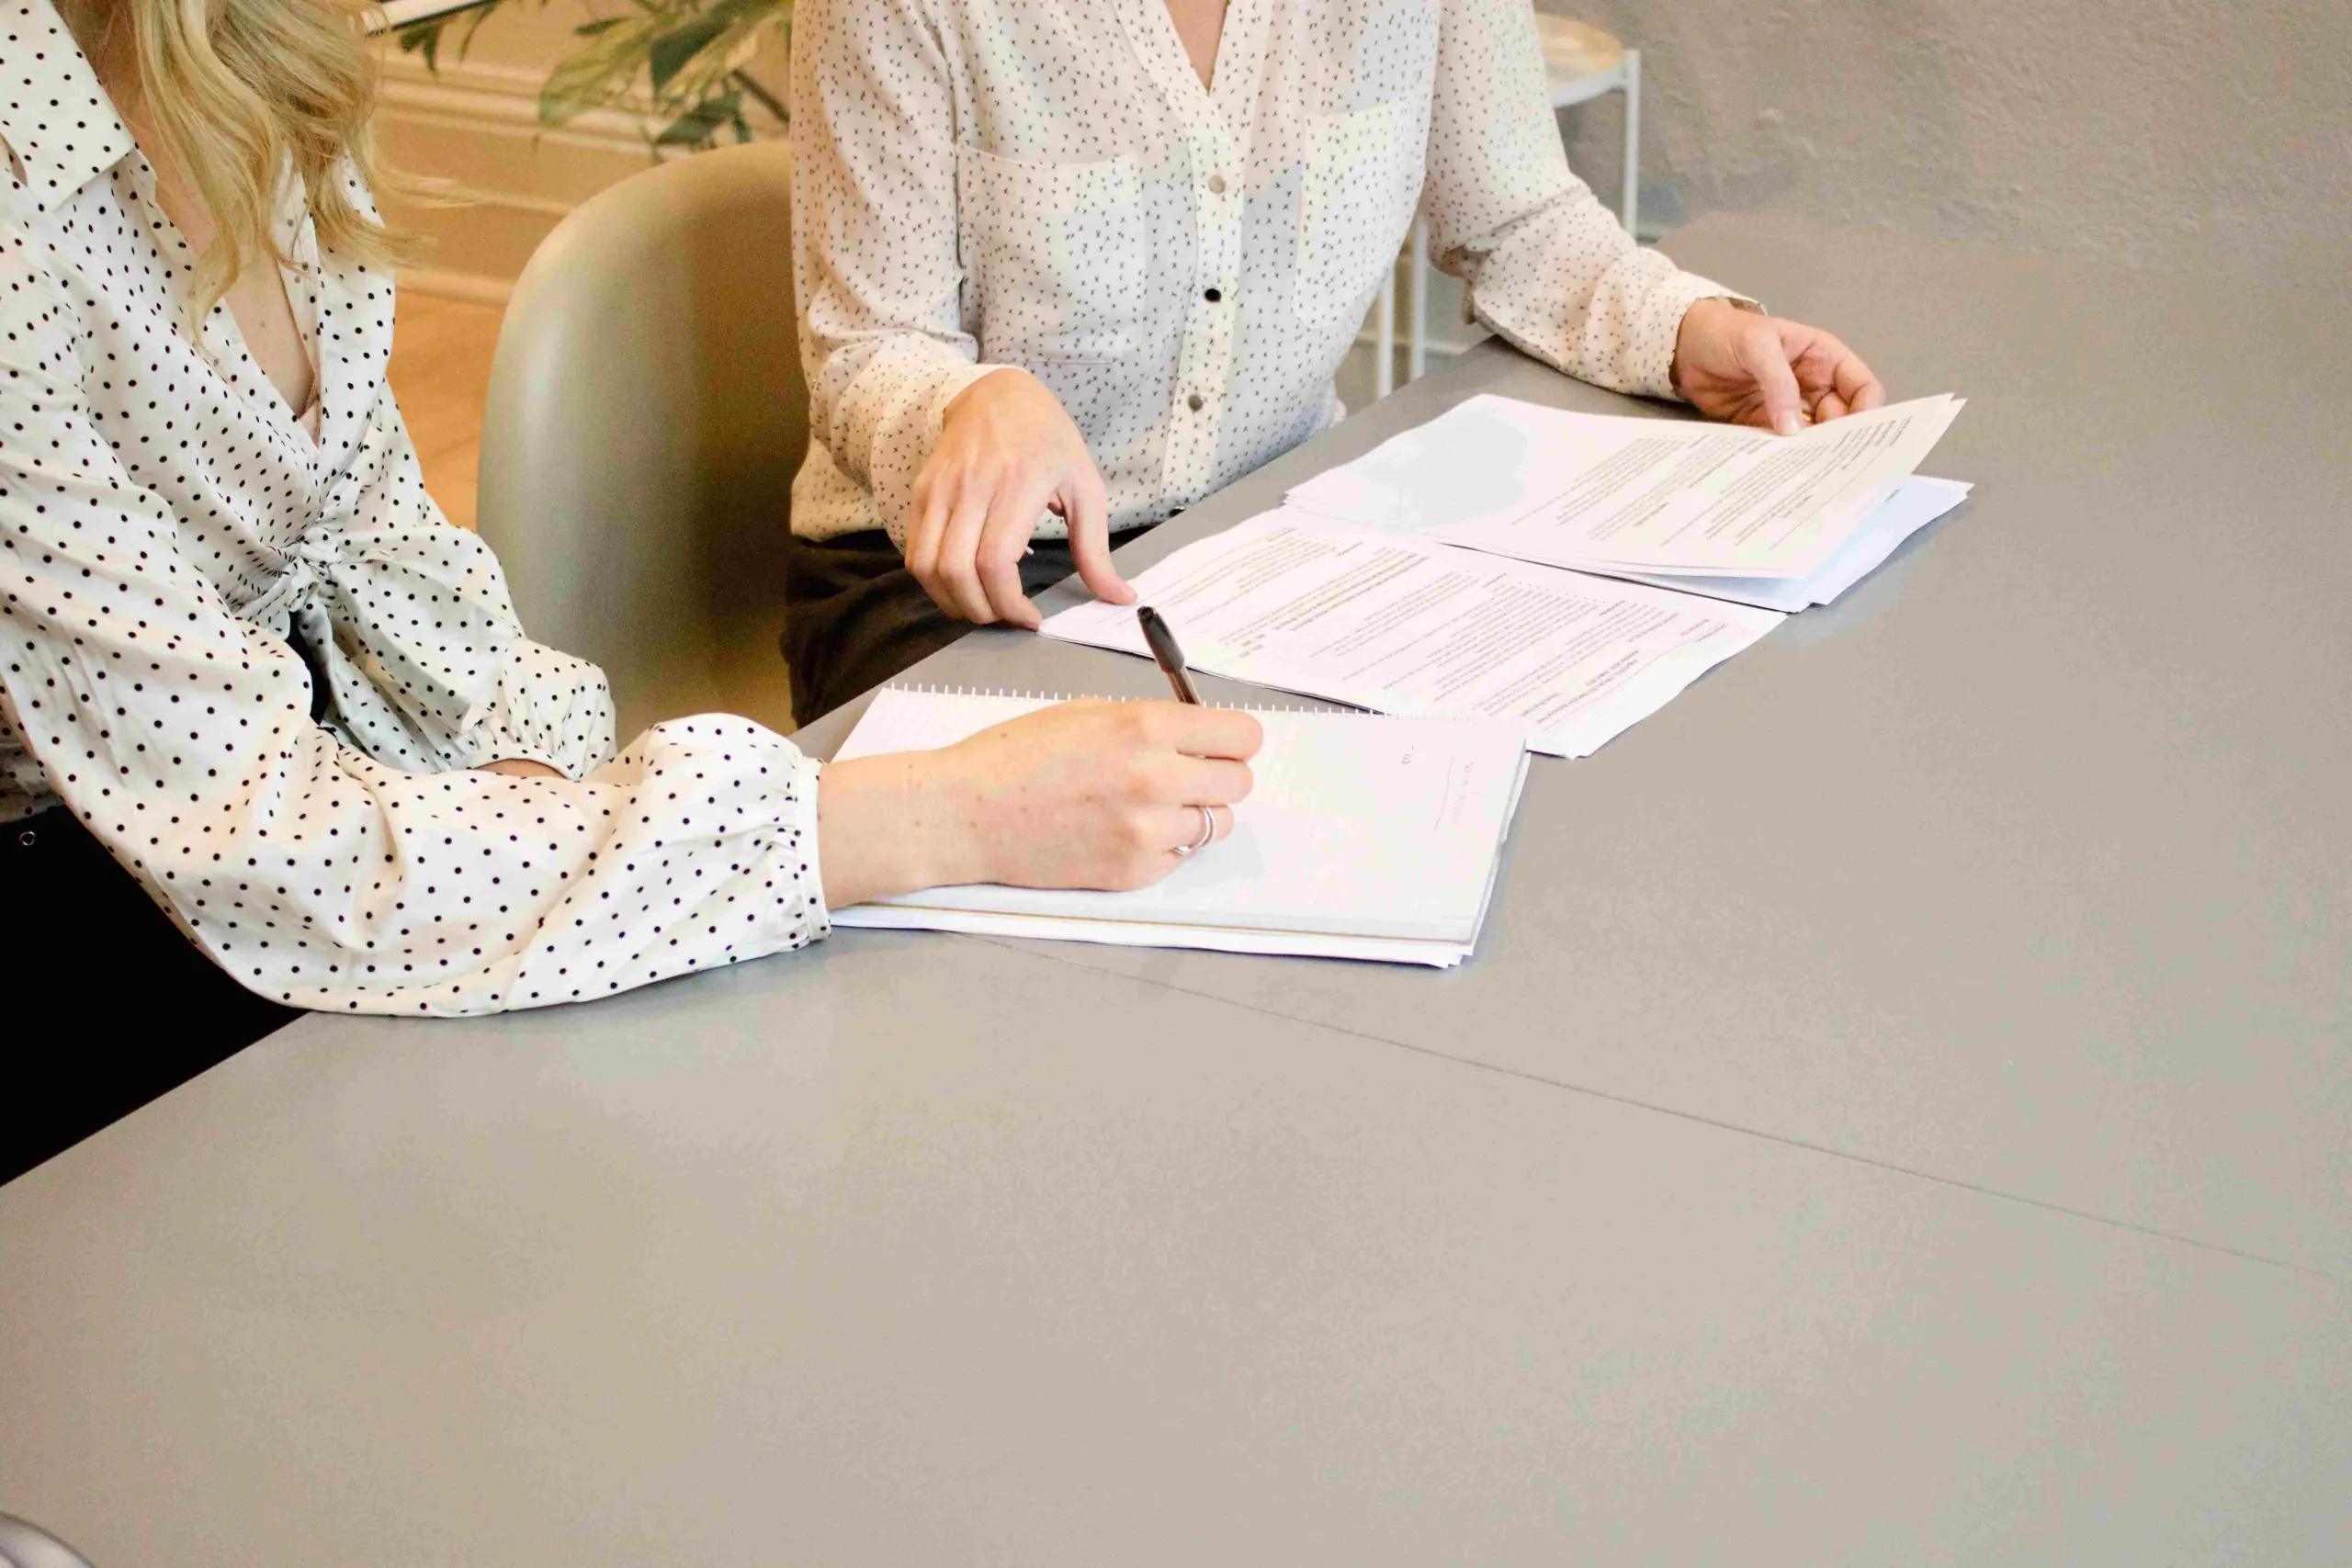 Two women wearing office attire sitting at a desk and signing contracts